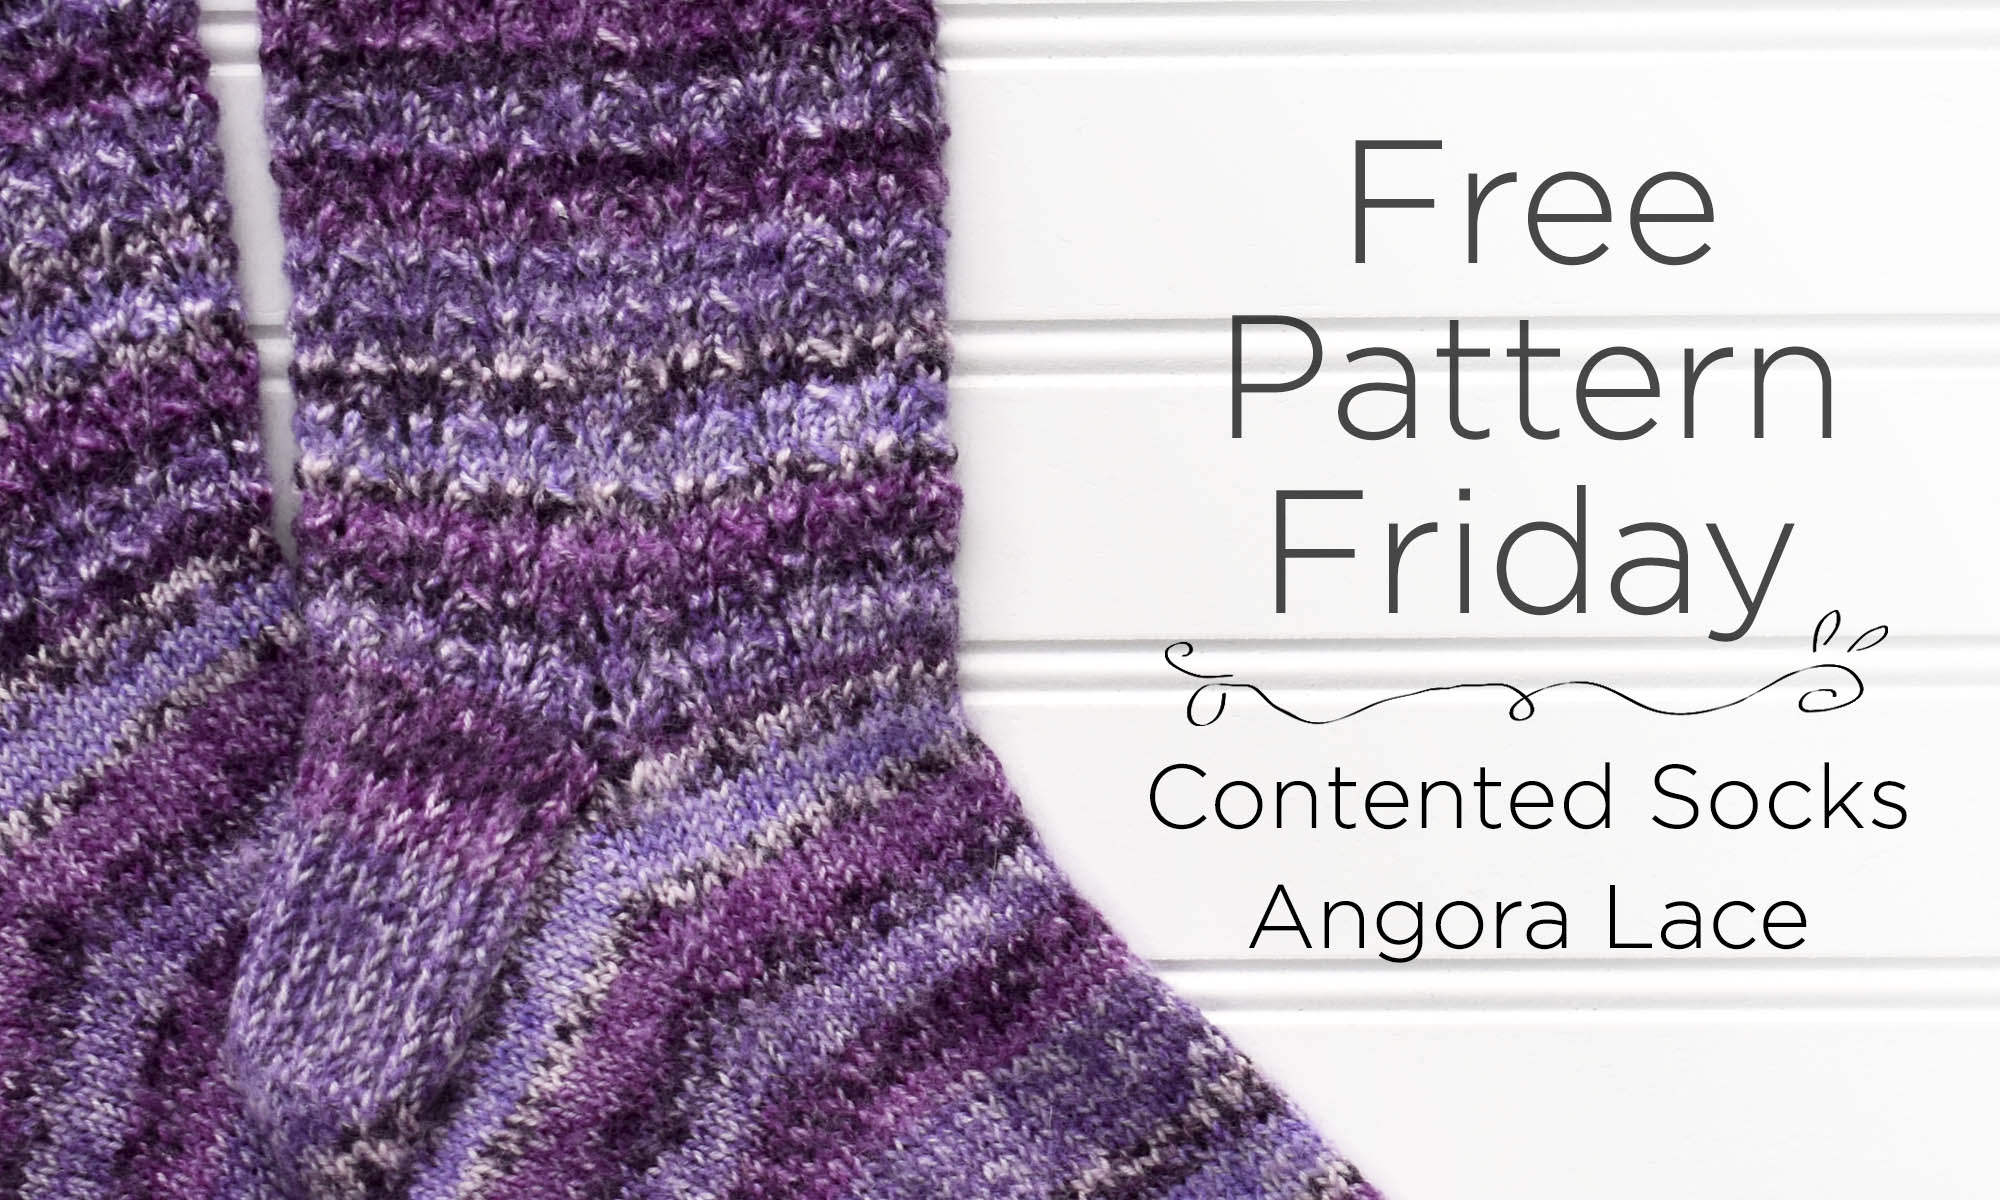 picture of purple socks with caption: Free Pattern Friday - Contented Socks in Angora Lace